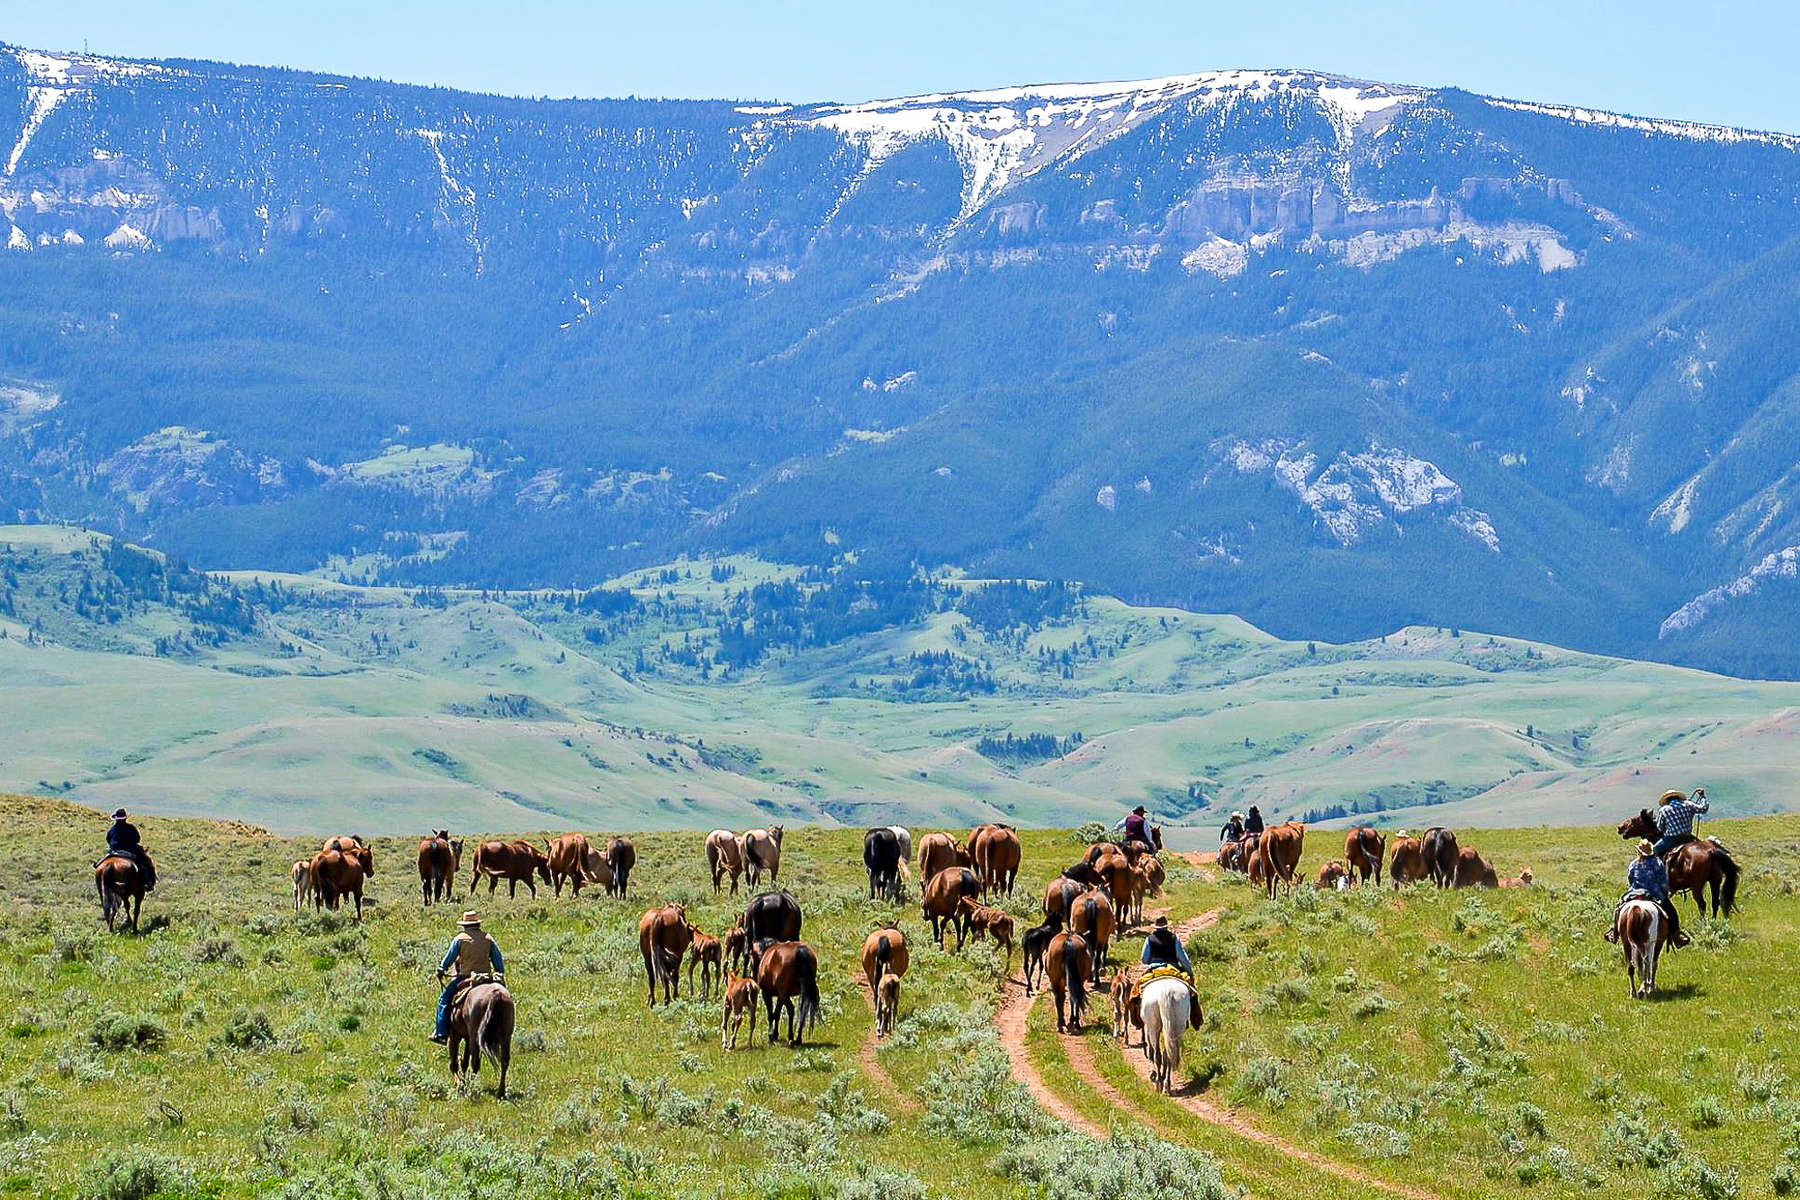 Loose horses in the Pryor mountains